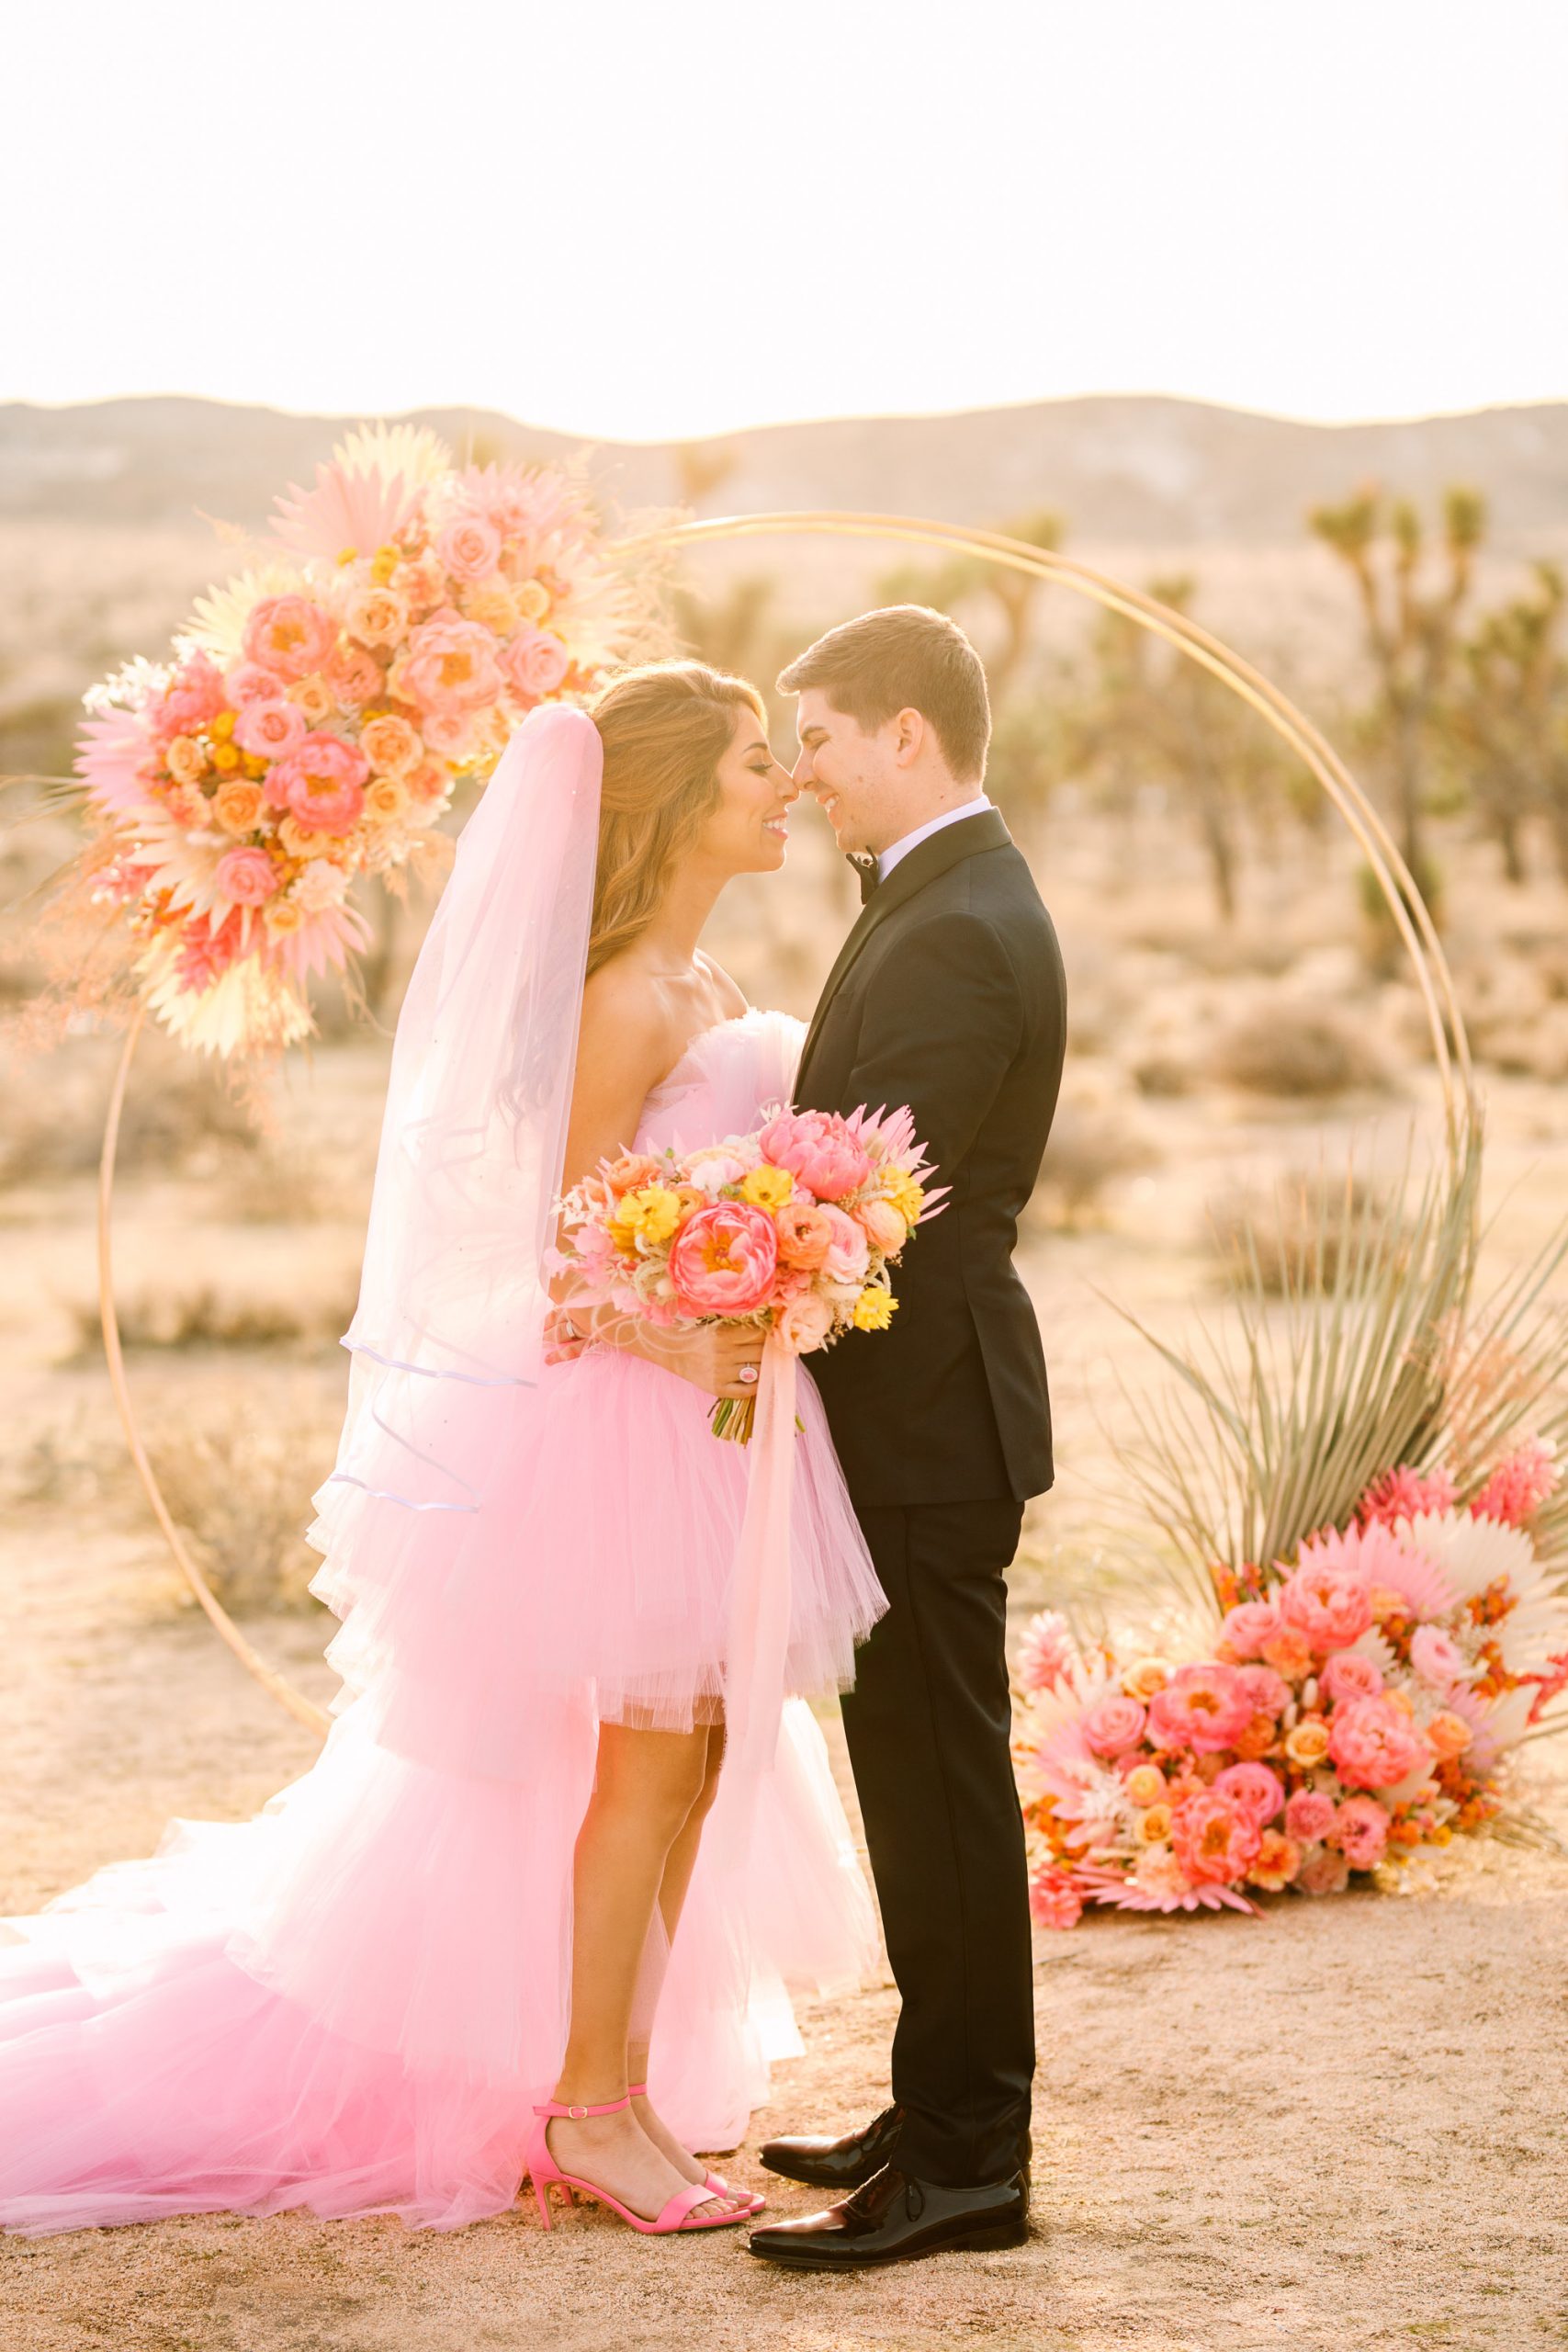 Bride and groom in front of circular ceremony arch | Pink wedding dress Joshua Tree elopement featured on Green Wedding Shoes | Colorful desert wedding inspiration for fun-loving couples in Southern California #joshuatreewedding #joshuatreeelopement #pinkwedding #greenweddingshoes Source: Mary Costa Photography | Los Angeles